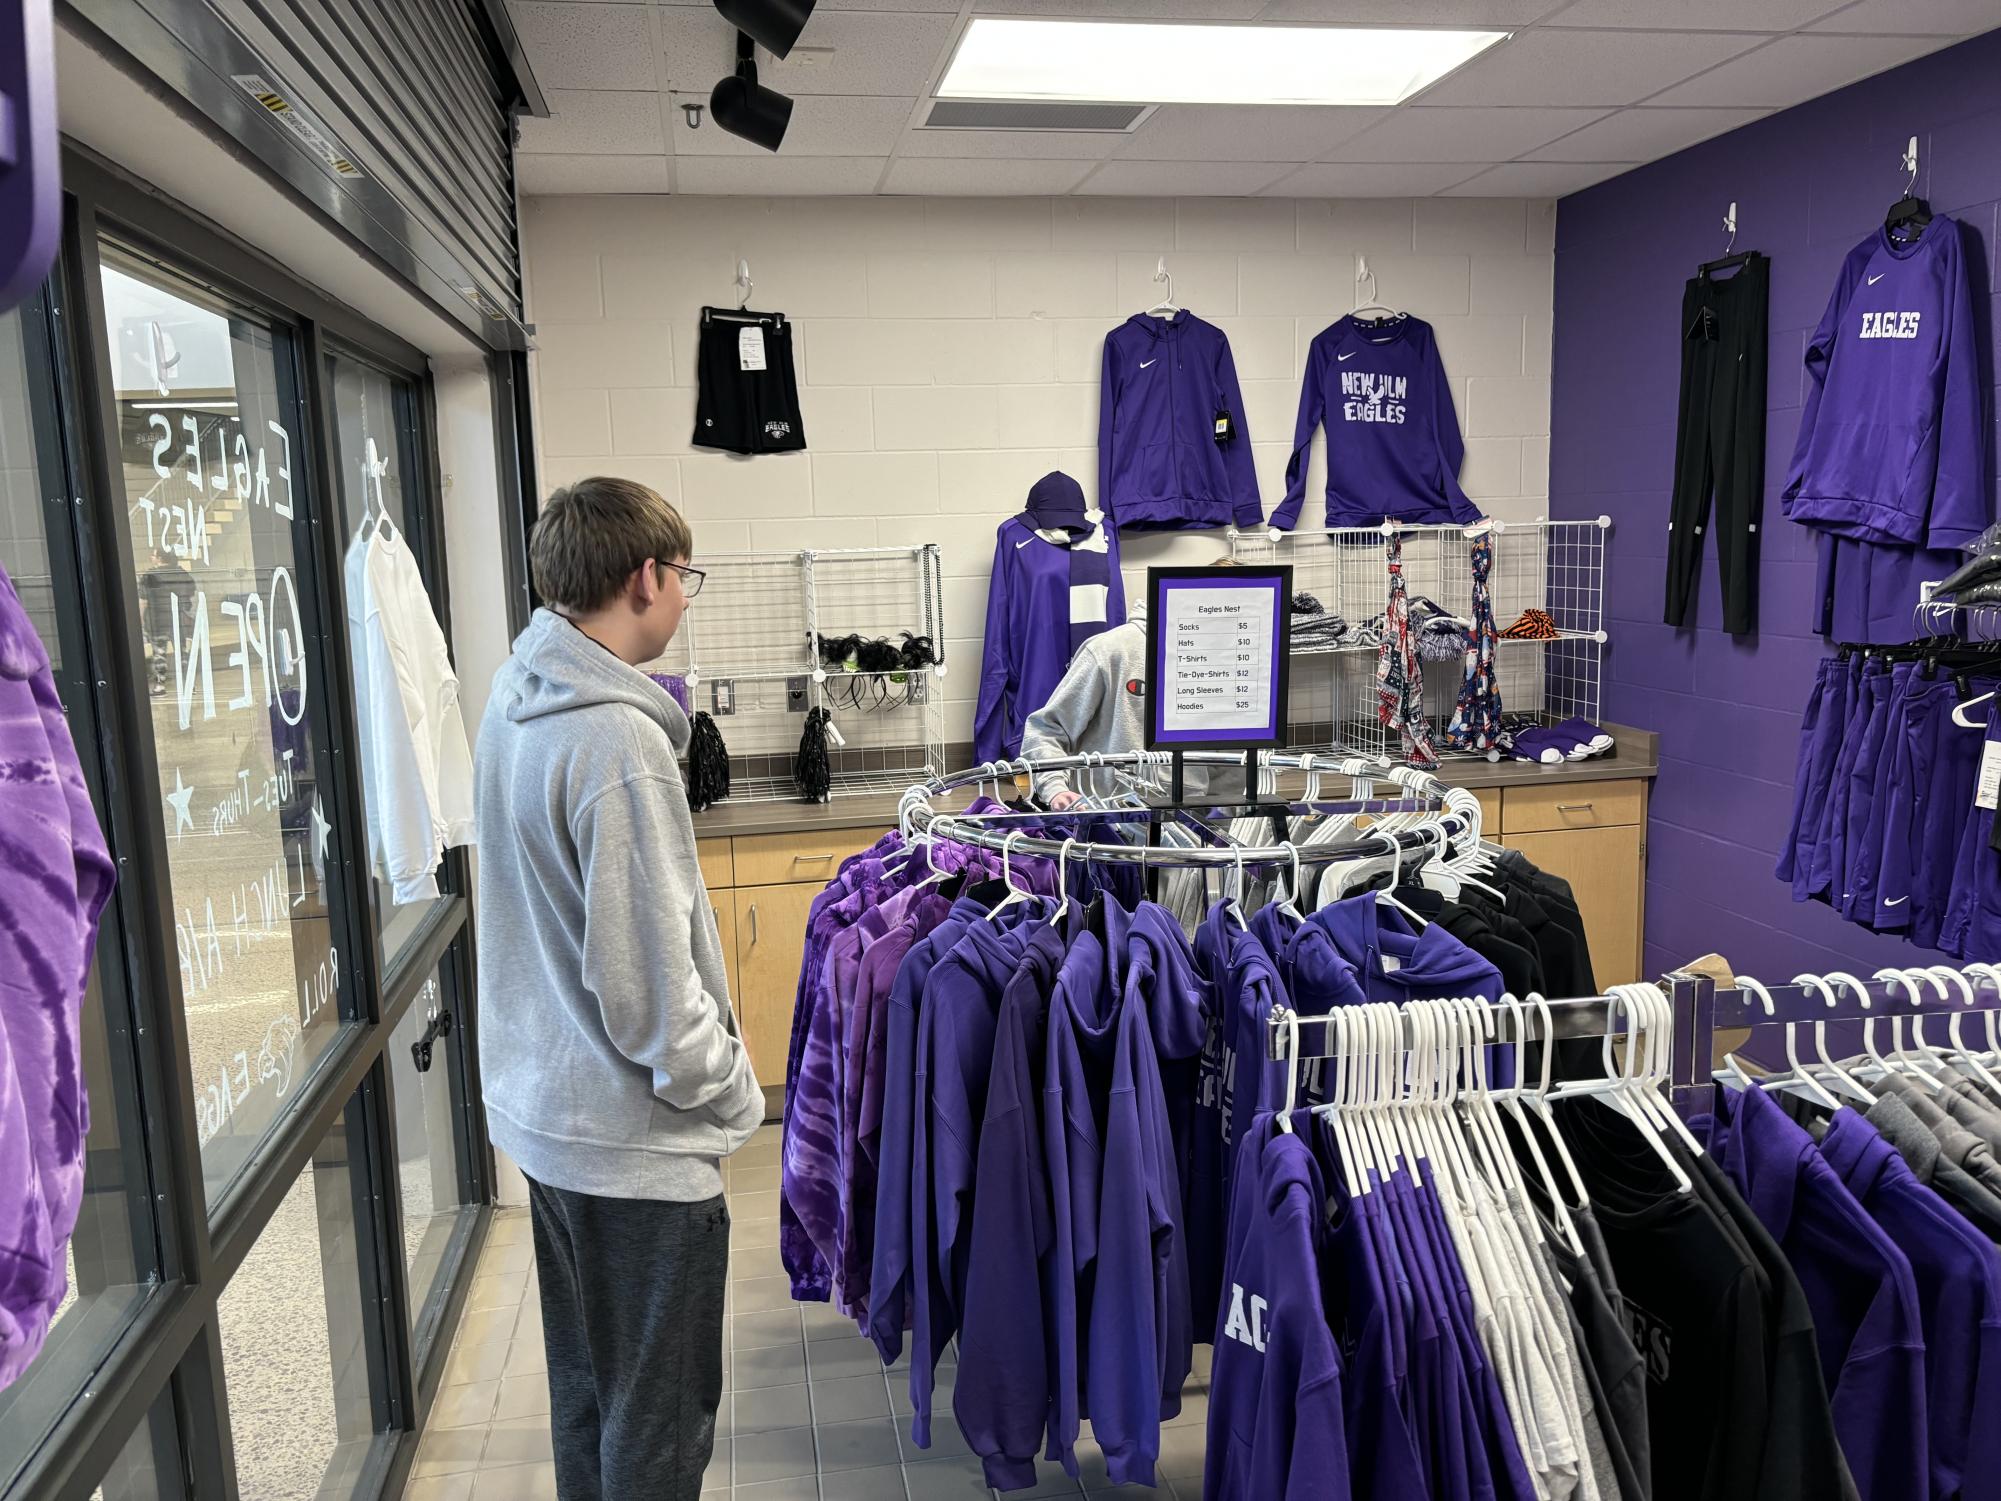 Seniors Ethan Neet and Brennan Benson shopping in the NUHS School Store on Thursday Feb. 2. The store has a wide variety of quality items available  for purchase, said Brennan B. With the start of the new semester comes a new group of students to manage the store and its inventory, meaning lots of new items for sale in the upcoming months. 